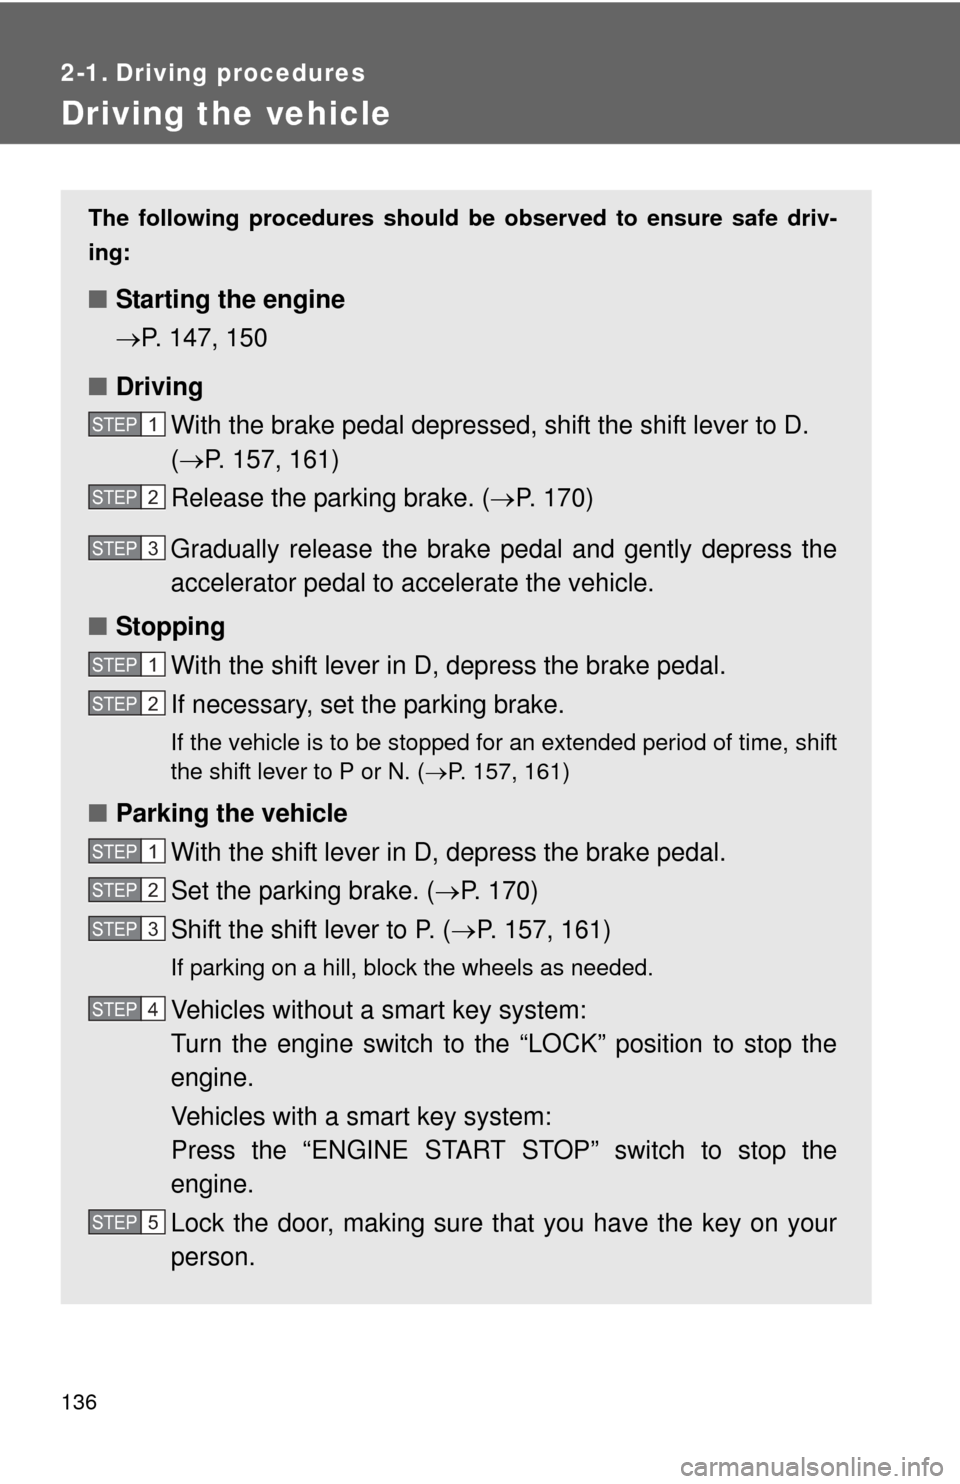 TOYOTA CAMRY 2014 XV50 / 9.G Owners Manual 136
2-1. Driving procedures
Driving the vehicle
The following procedures should be observed to ensure safe driv-
ing:
■ Starting the engine 
P. 147, 150
■ Driving
With the brake pedal depressed